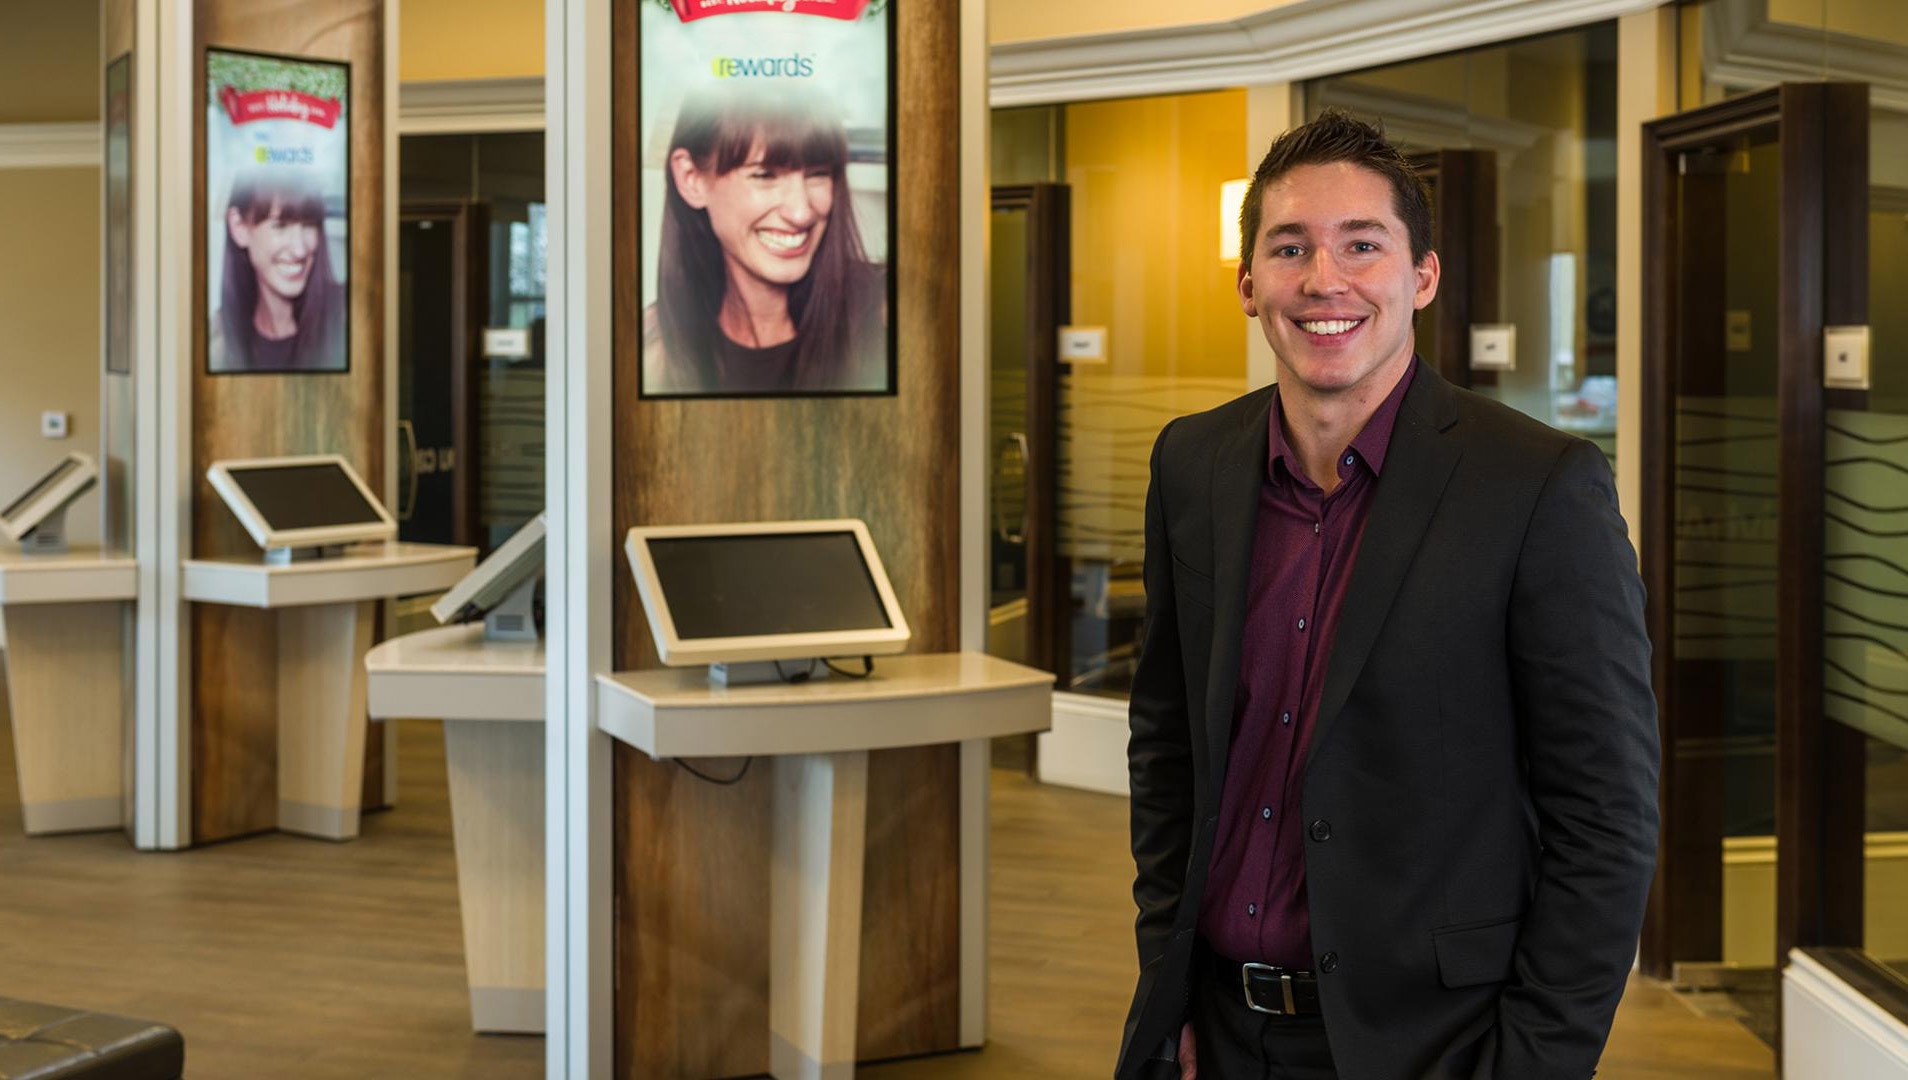 A man in a black suit with a burgundy shirt standing in the middle of an empty customer area in a bank, smiling.